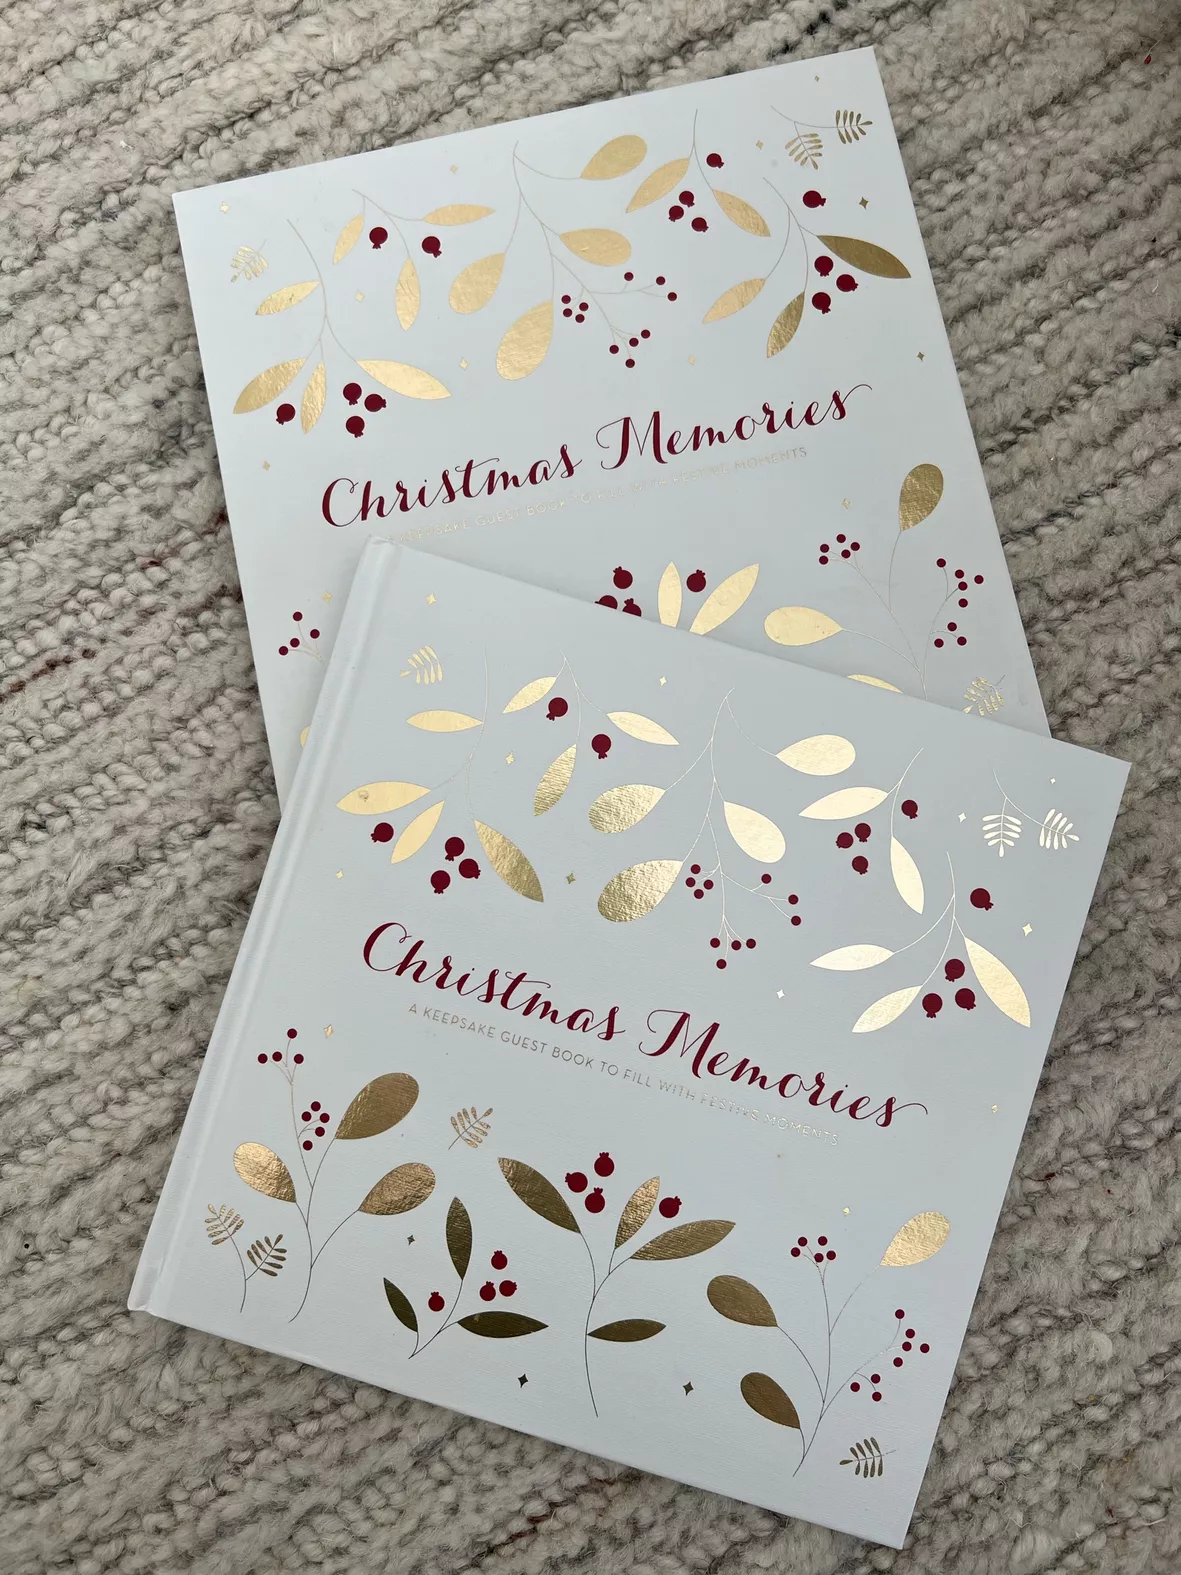 Christmas Memories — A Keepsake Guest Book to Fill with Festive Moments